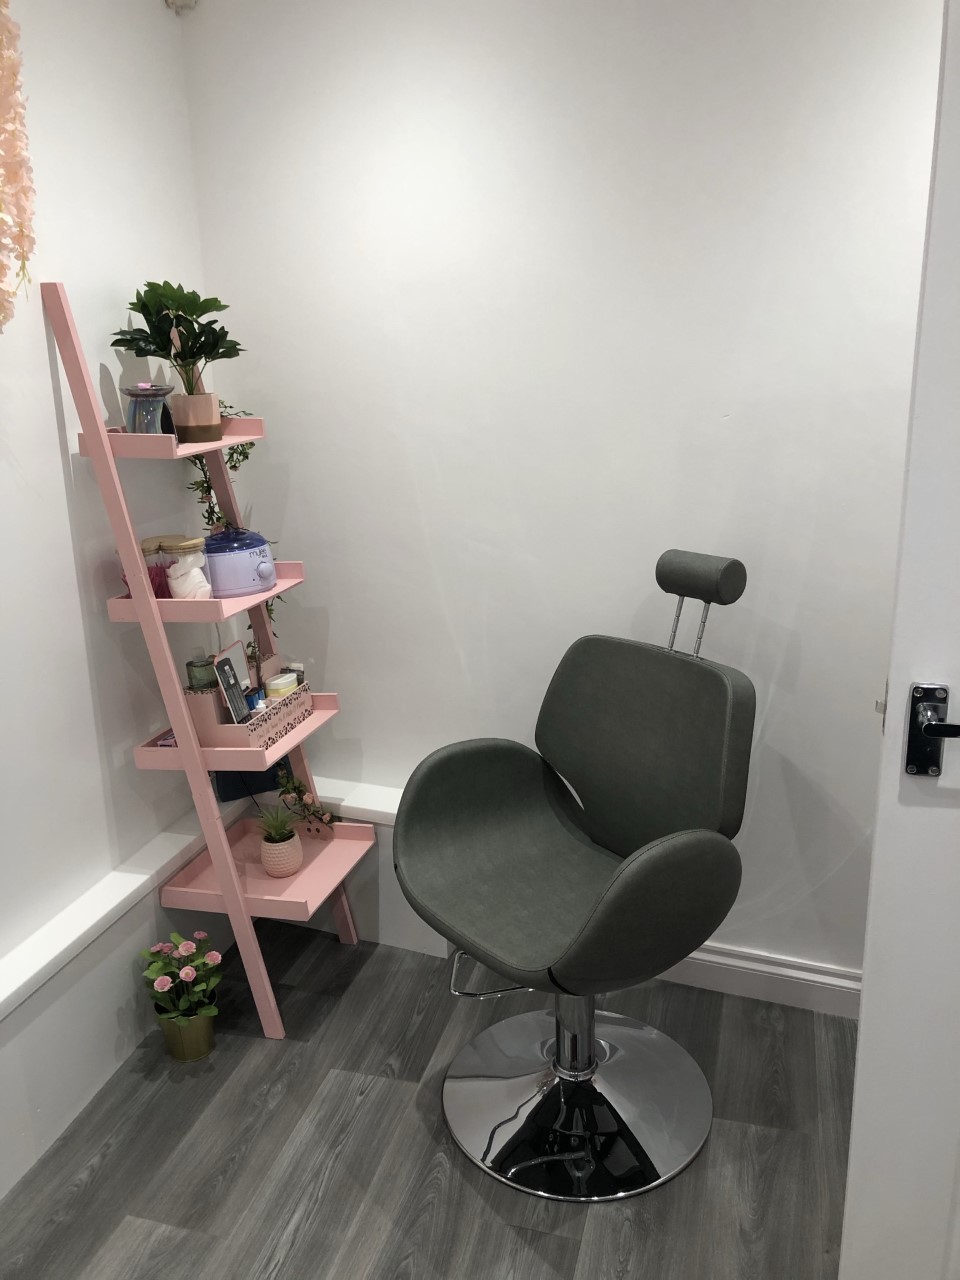 Customers are always made to feel welcome at Beehive Hair Salon